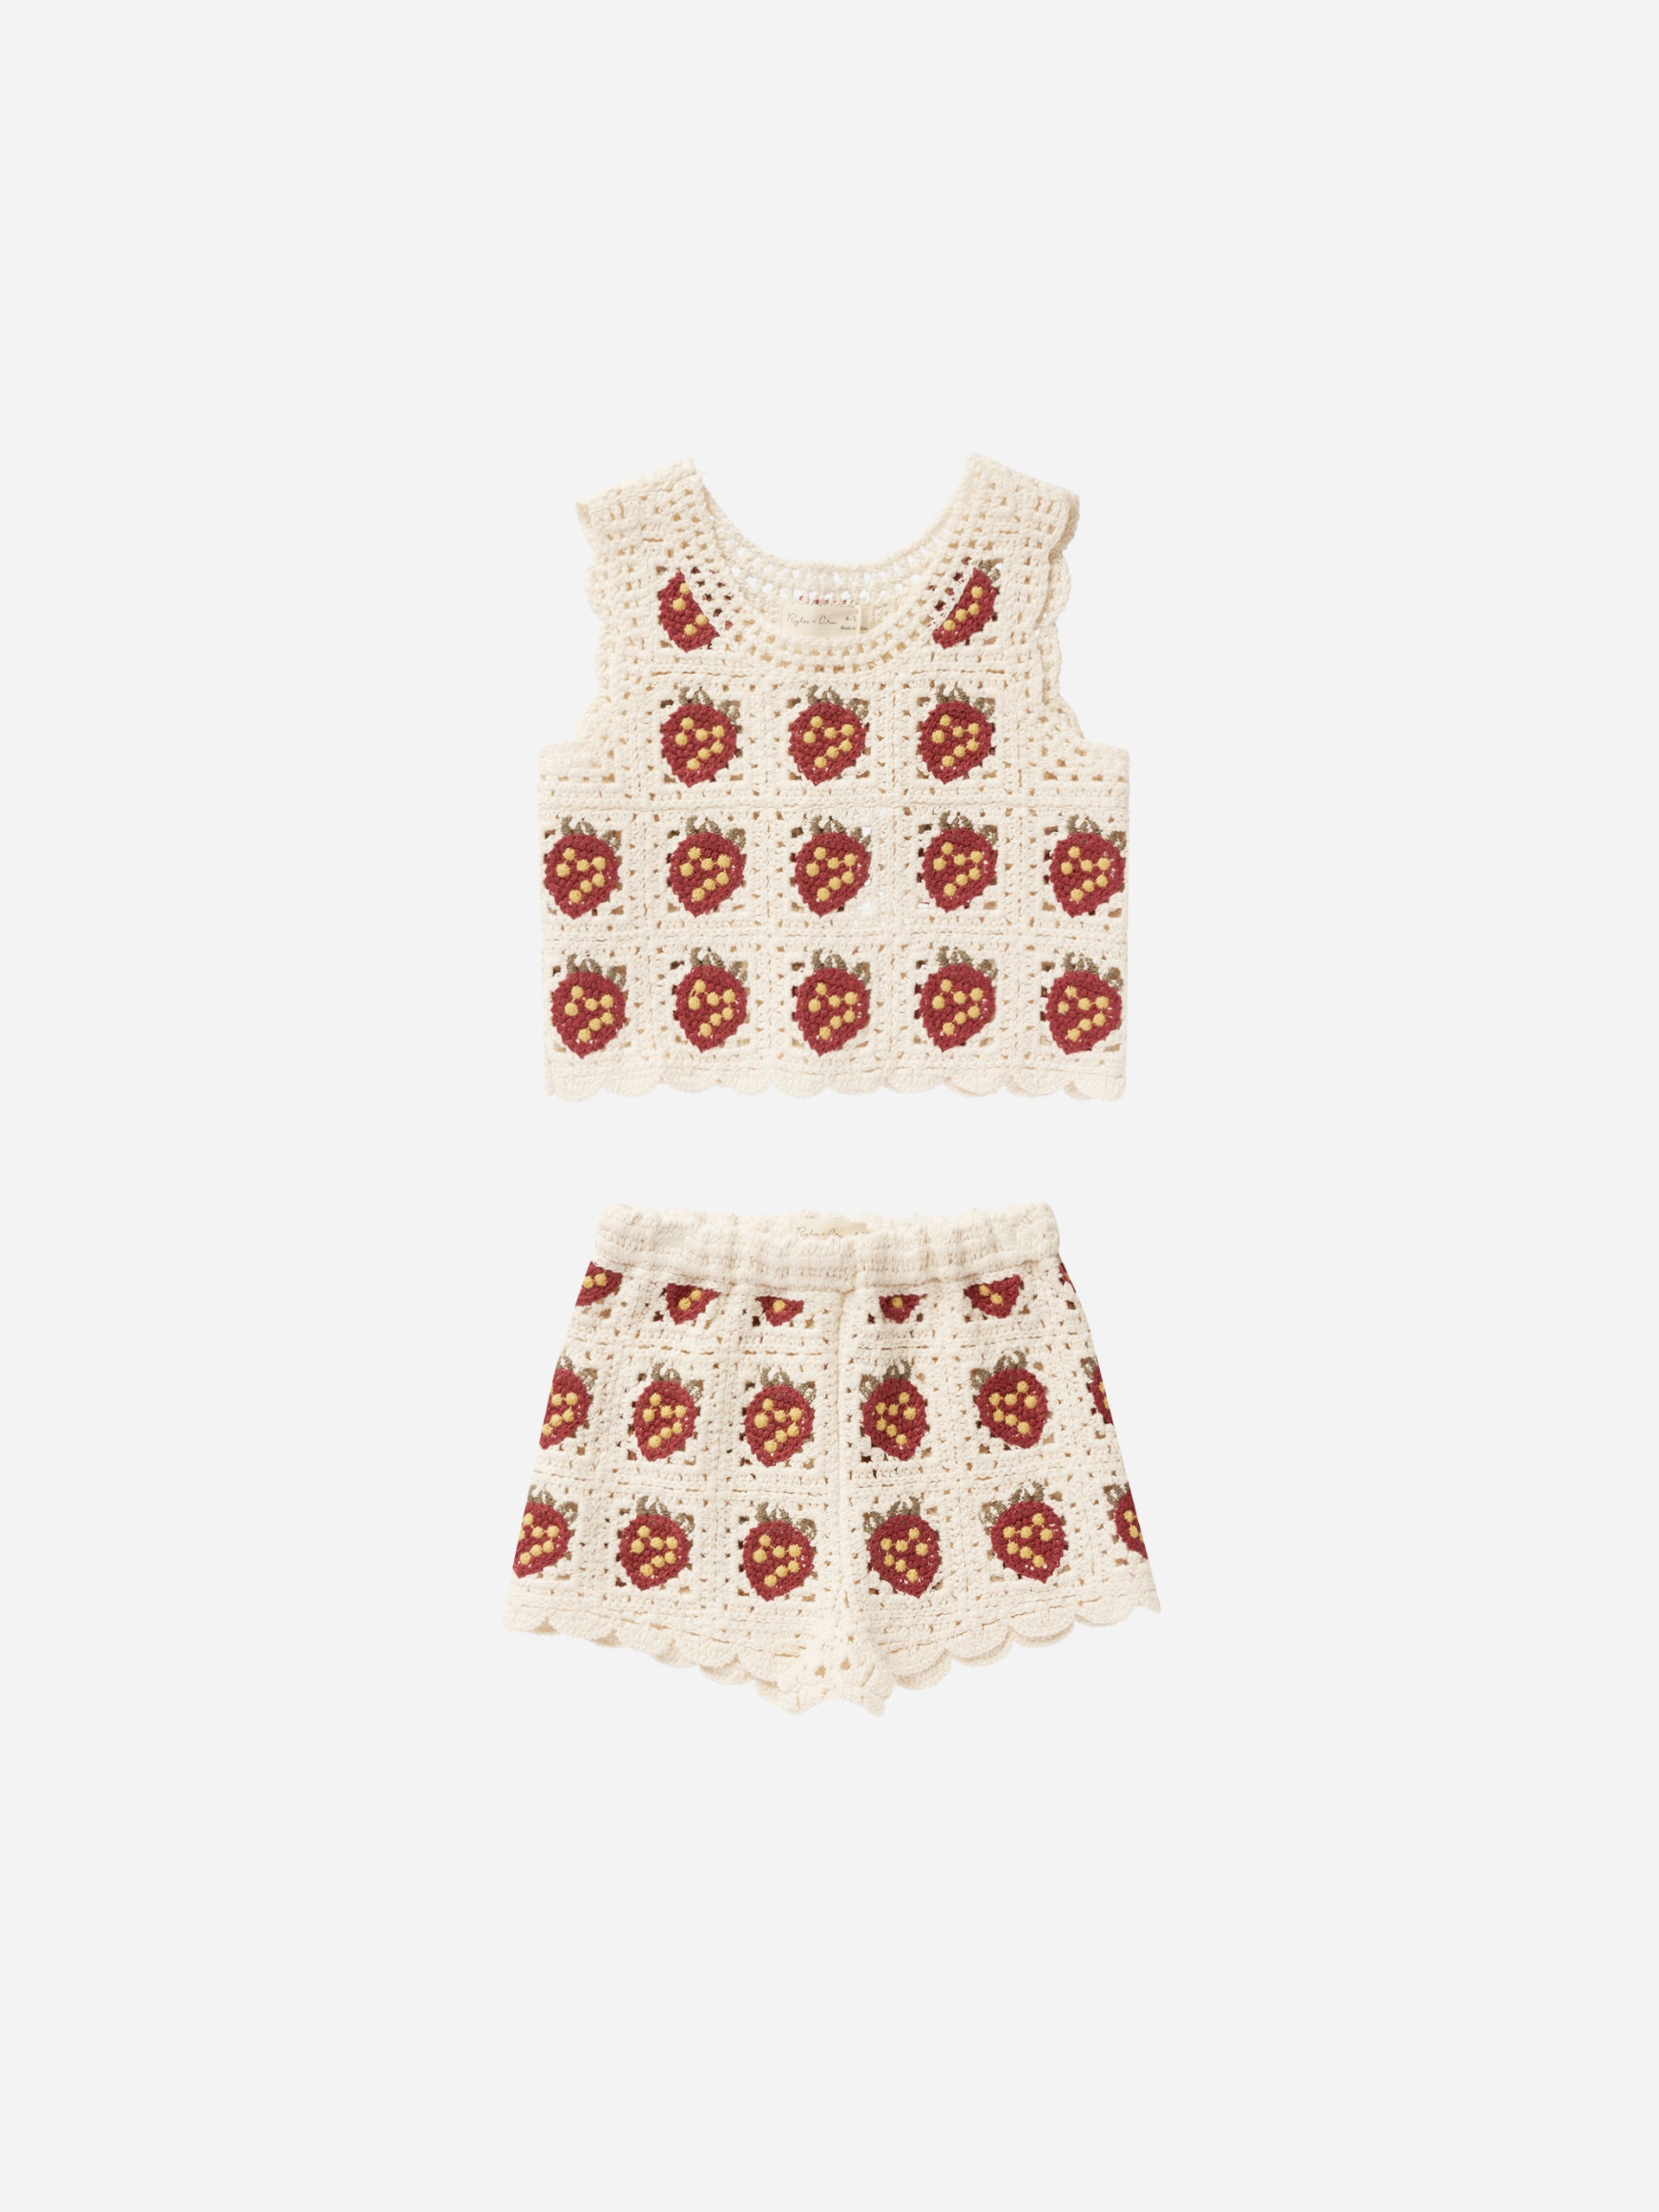 Crochet Tank Set || Strawberry - Rylee + Cru | Kids Clothes | Trendy Baby Clothes | Modern Infant Outfits |